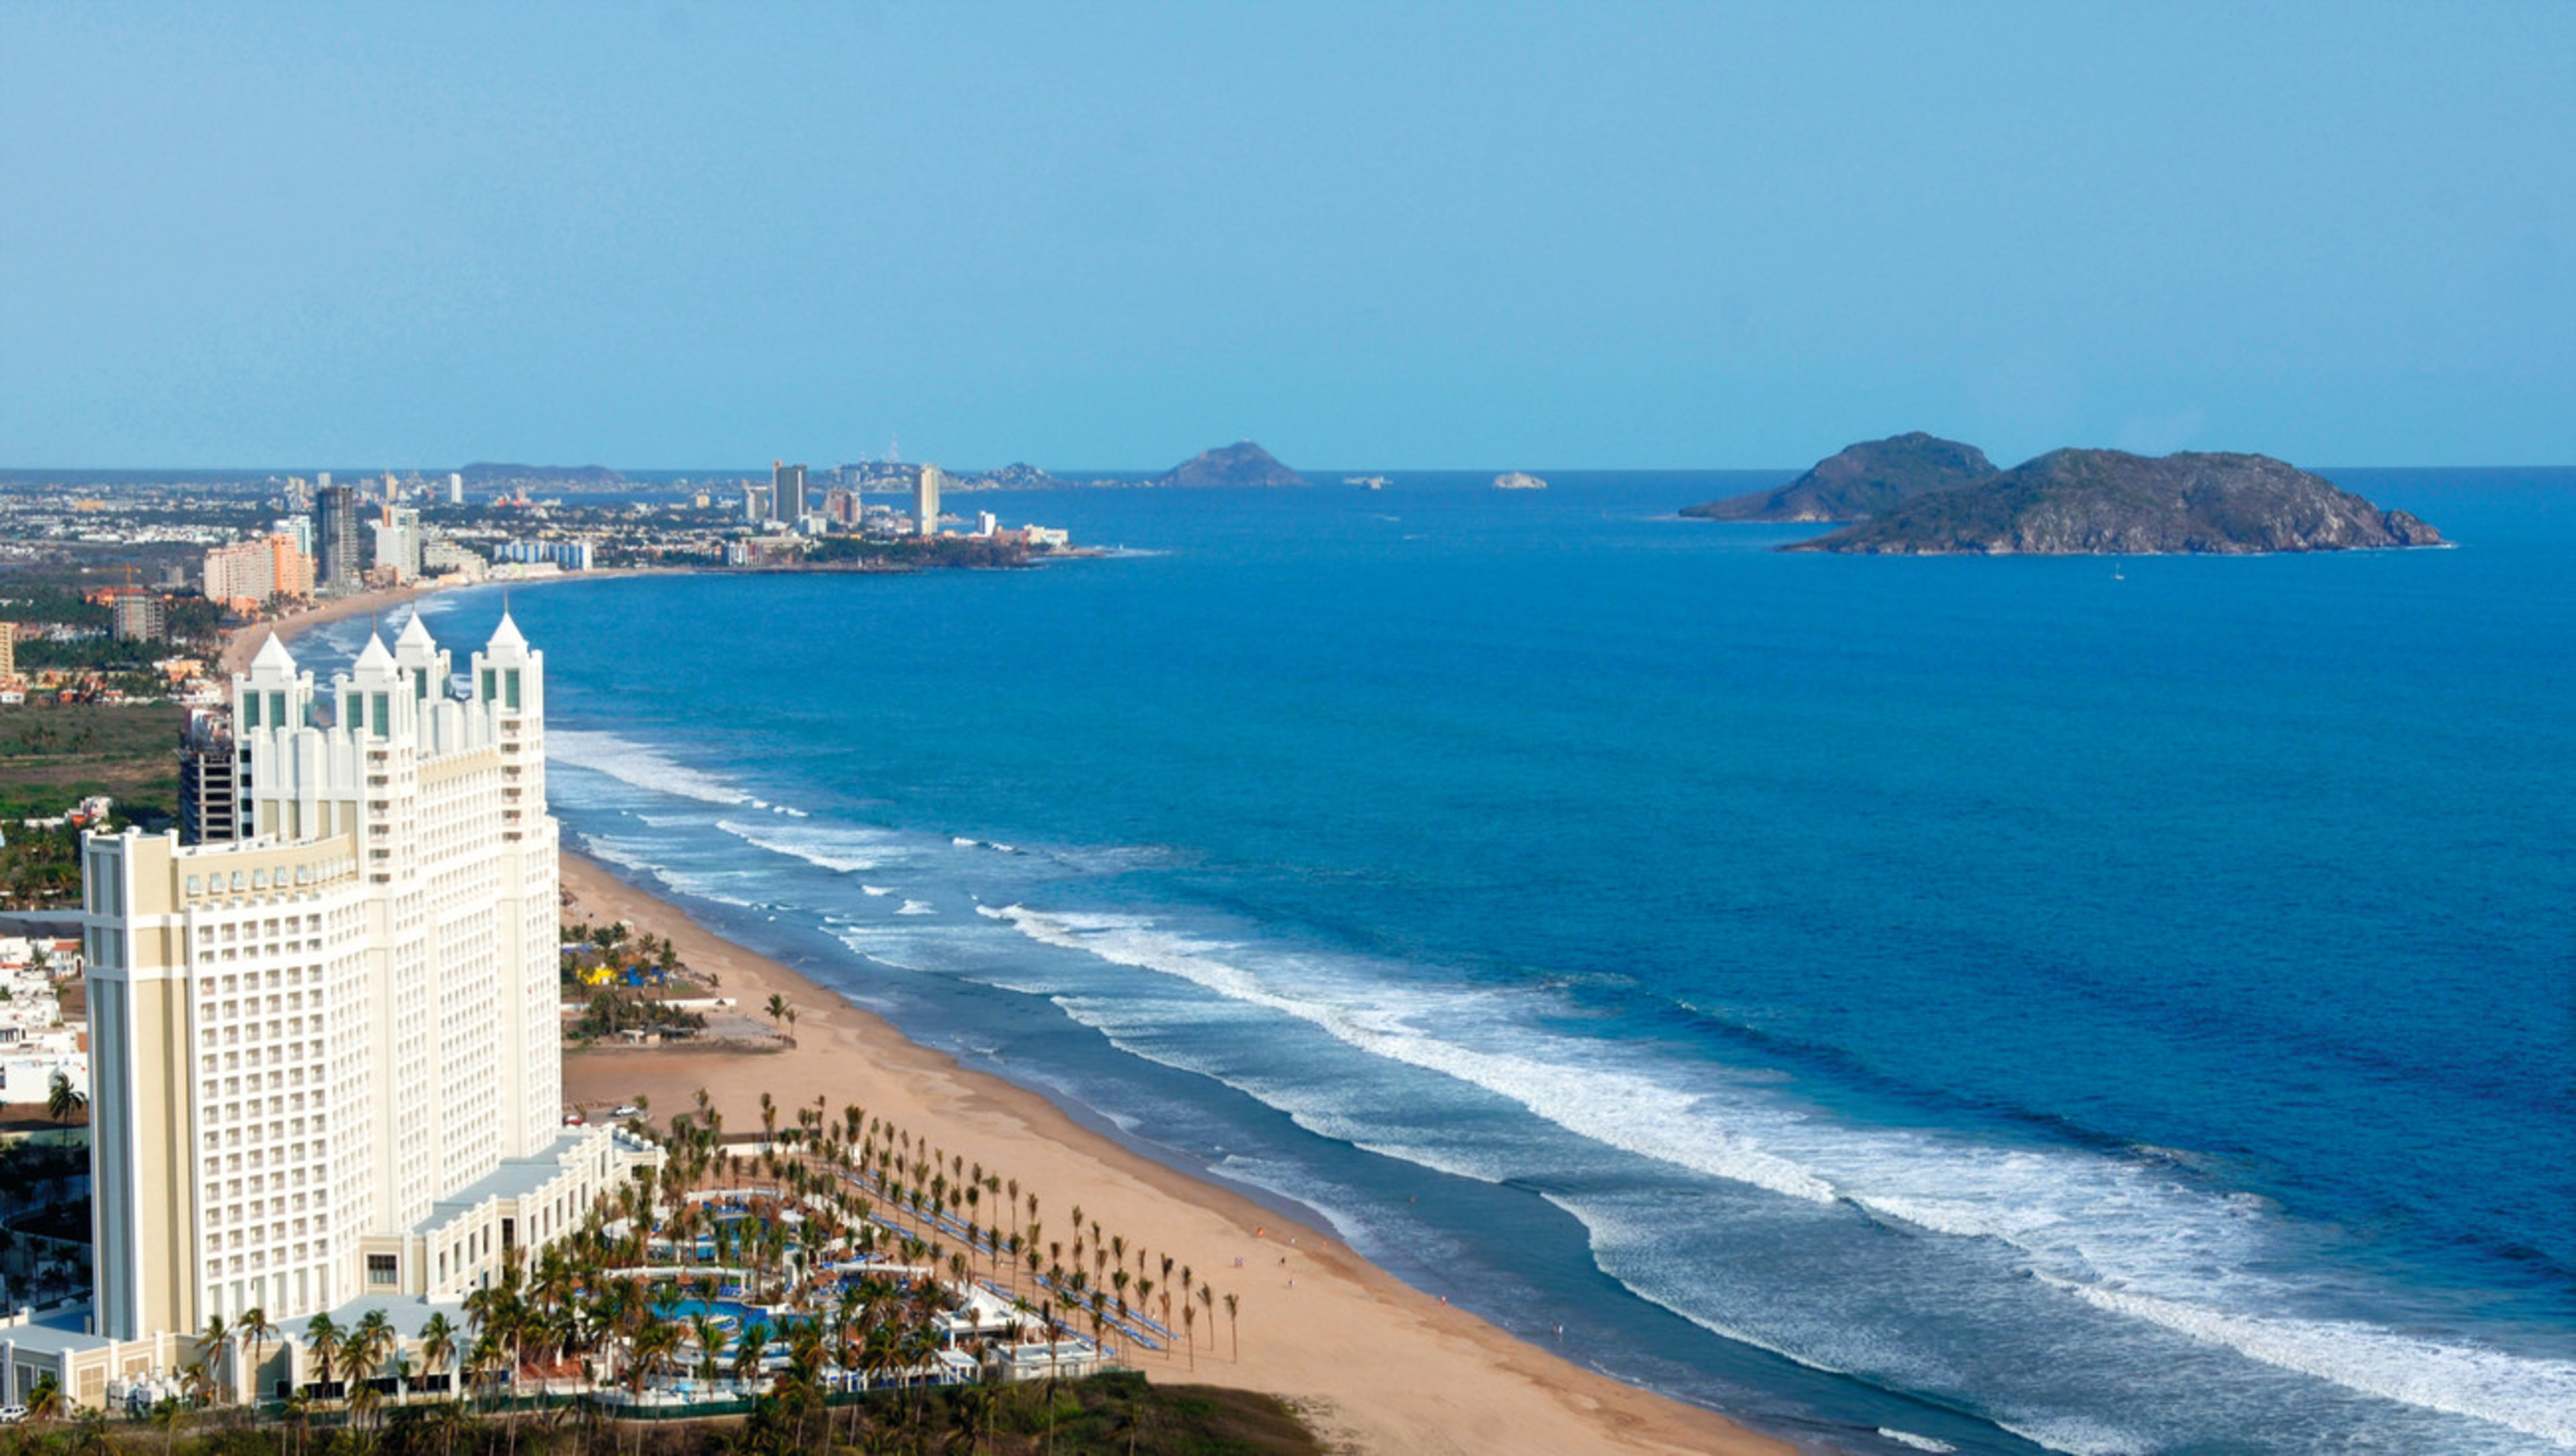 Come to Mazatlán and enjoy your holiday at the Hotel Riu Emerald Bay - RIU....